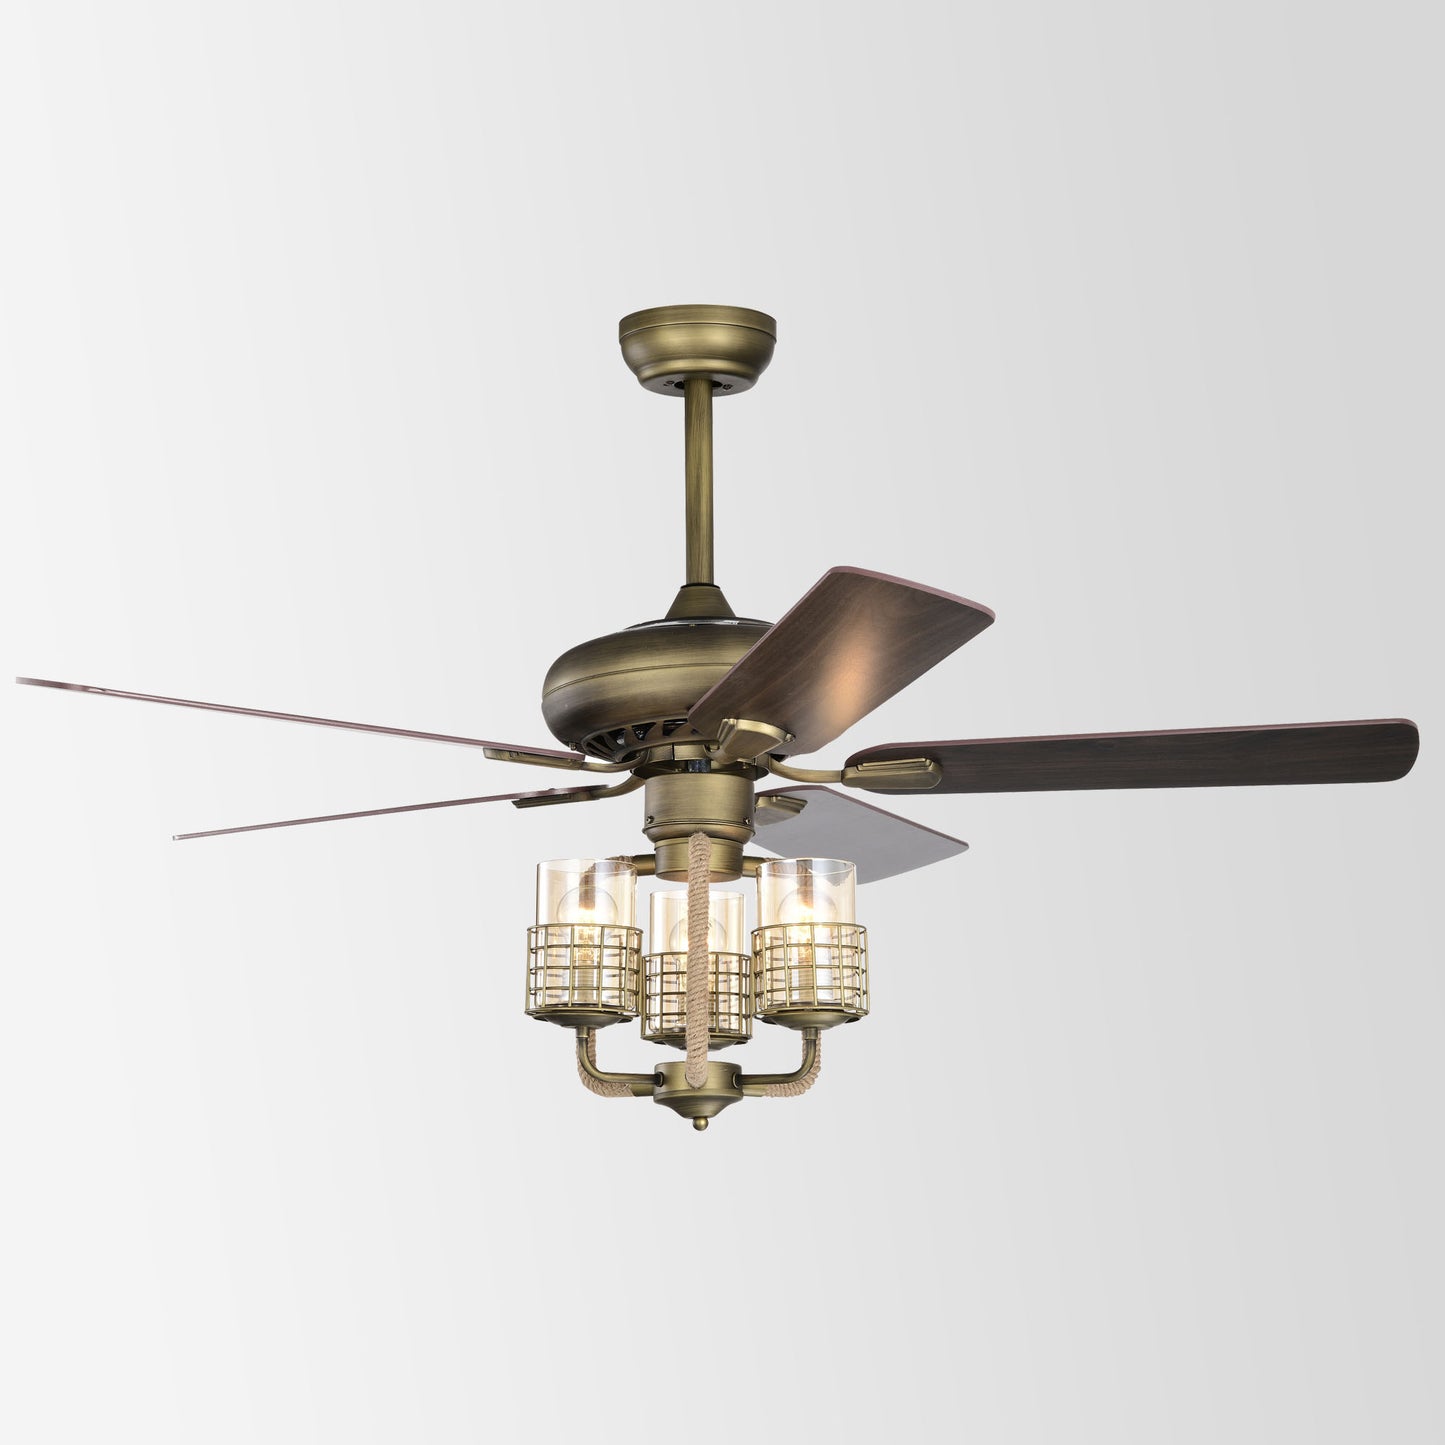 52inch Bronze Metal 3 Lights Ceiling Fan with 5 Wood Blades, Two-color fan blade, AC Motor, Remote Control, Reversible Airflow